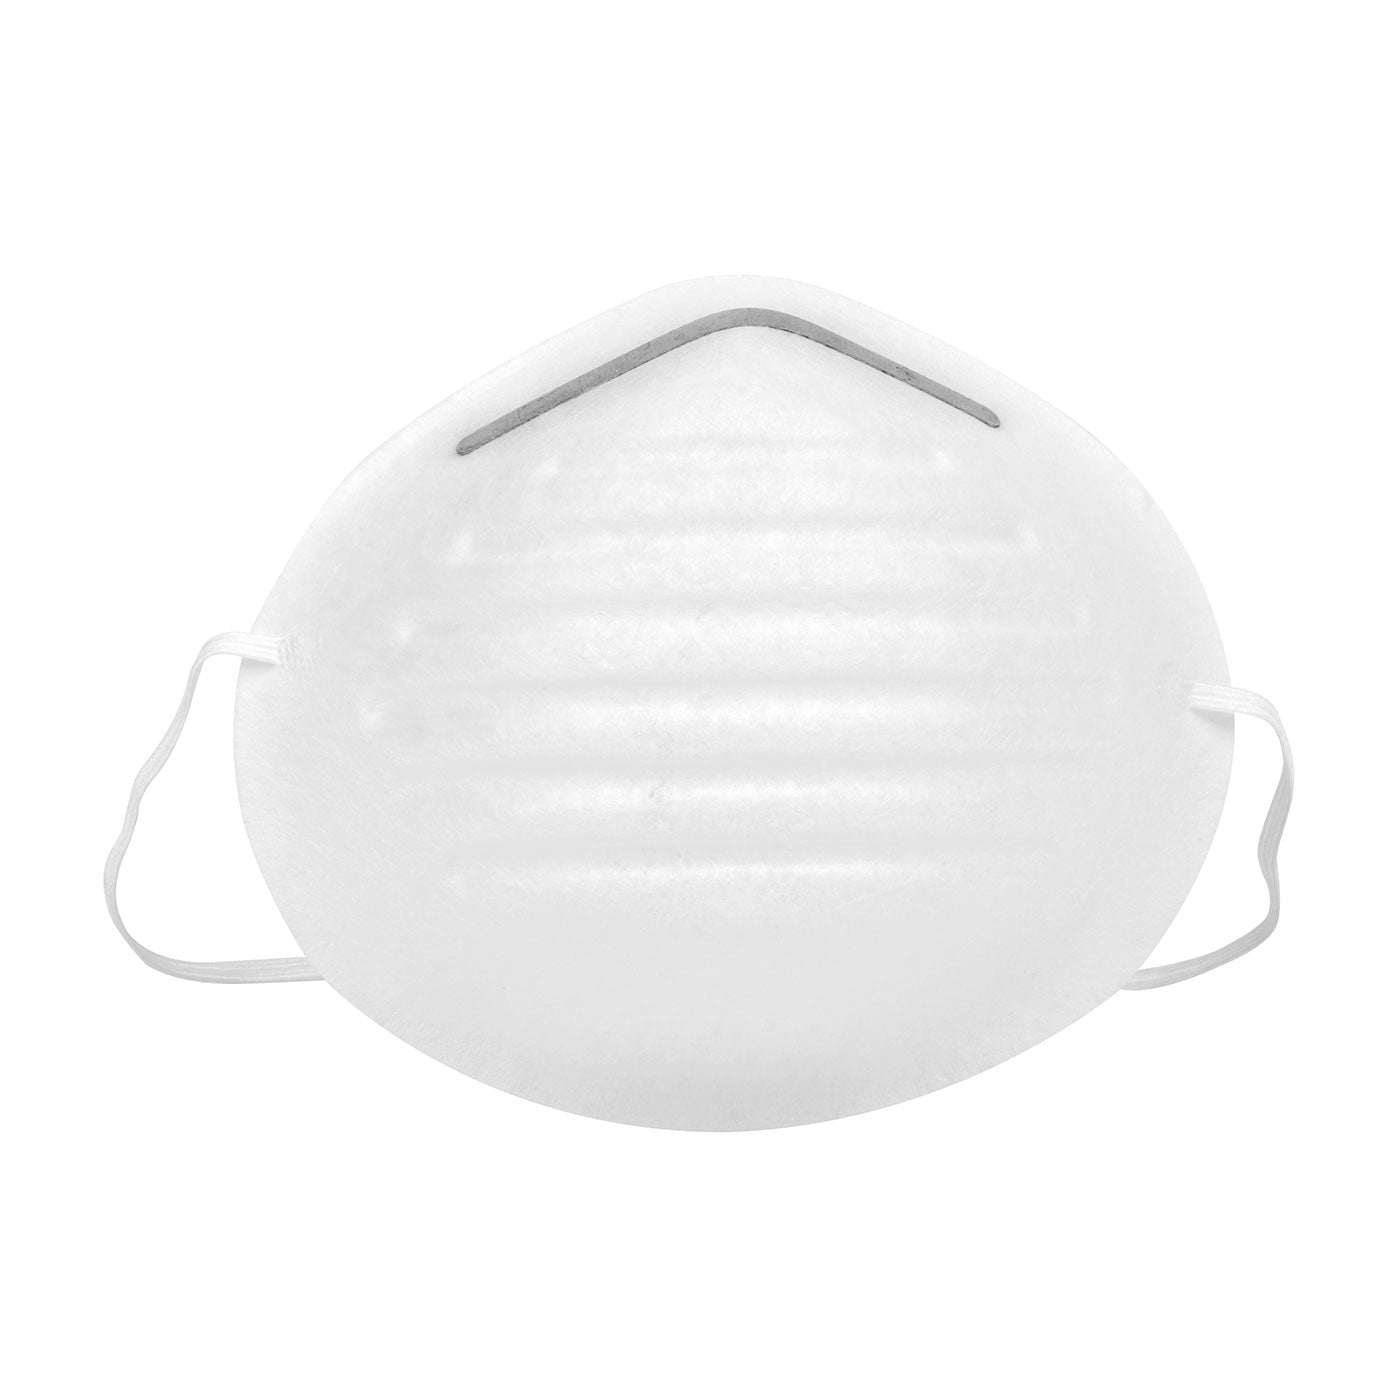 PIP Safety Works Non-Toxic Dust Mask - 50 pack